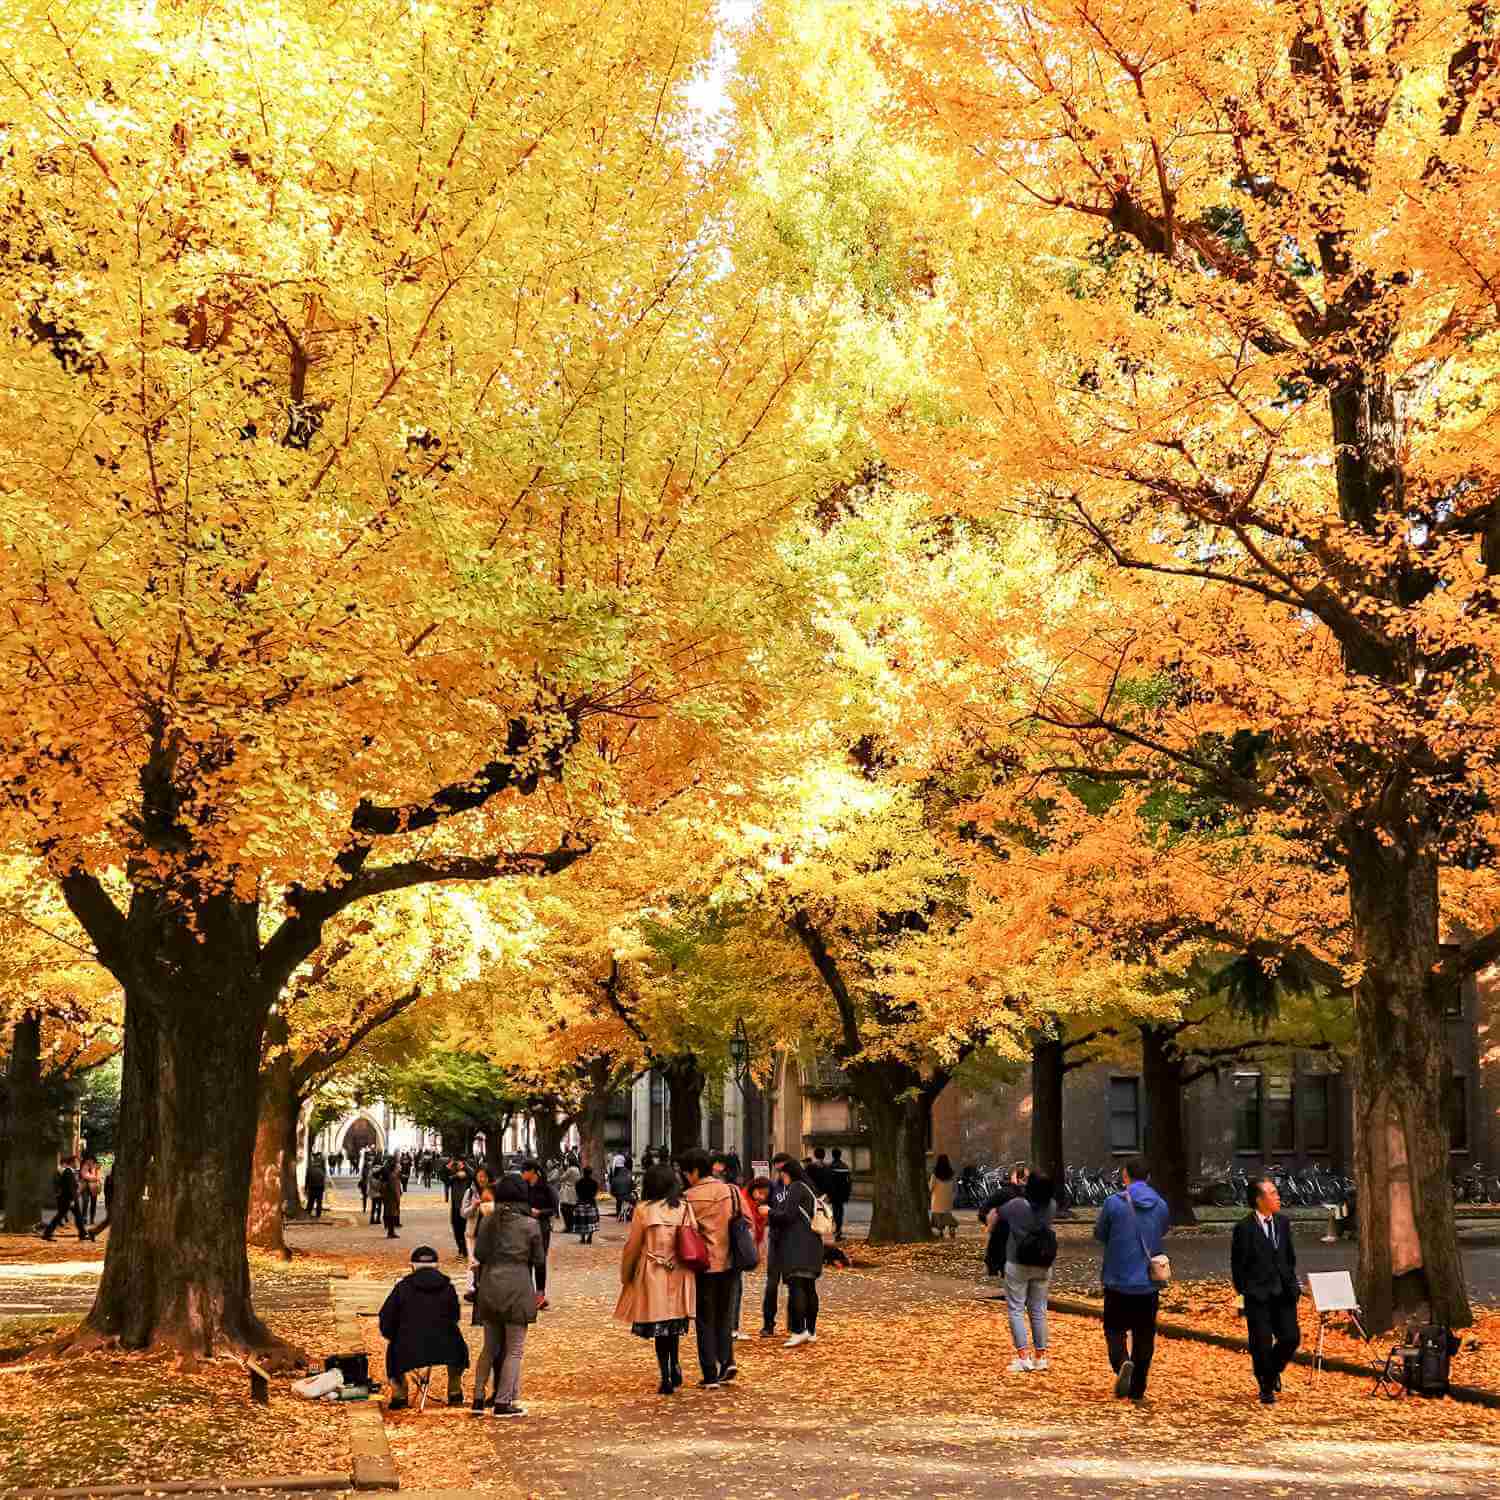 The Hongo campus of the University of Tokyo has beautiful autumn leaves in November, Tokyo = Shutterstock 9